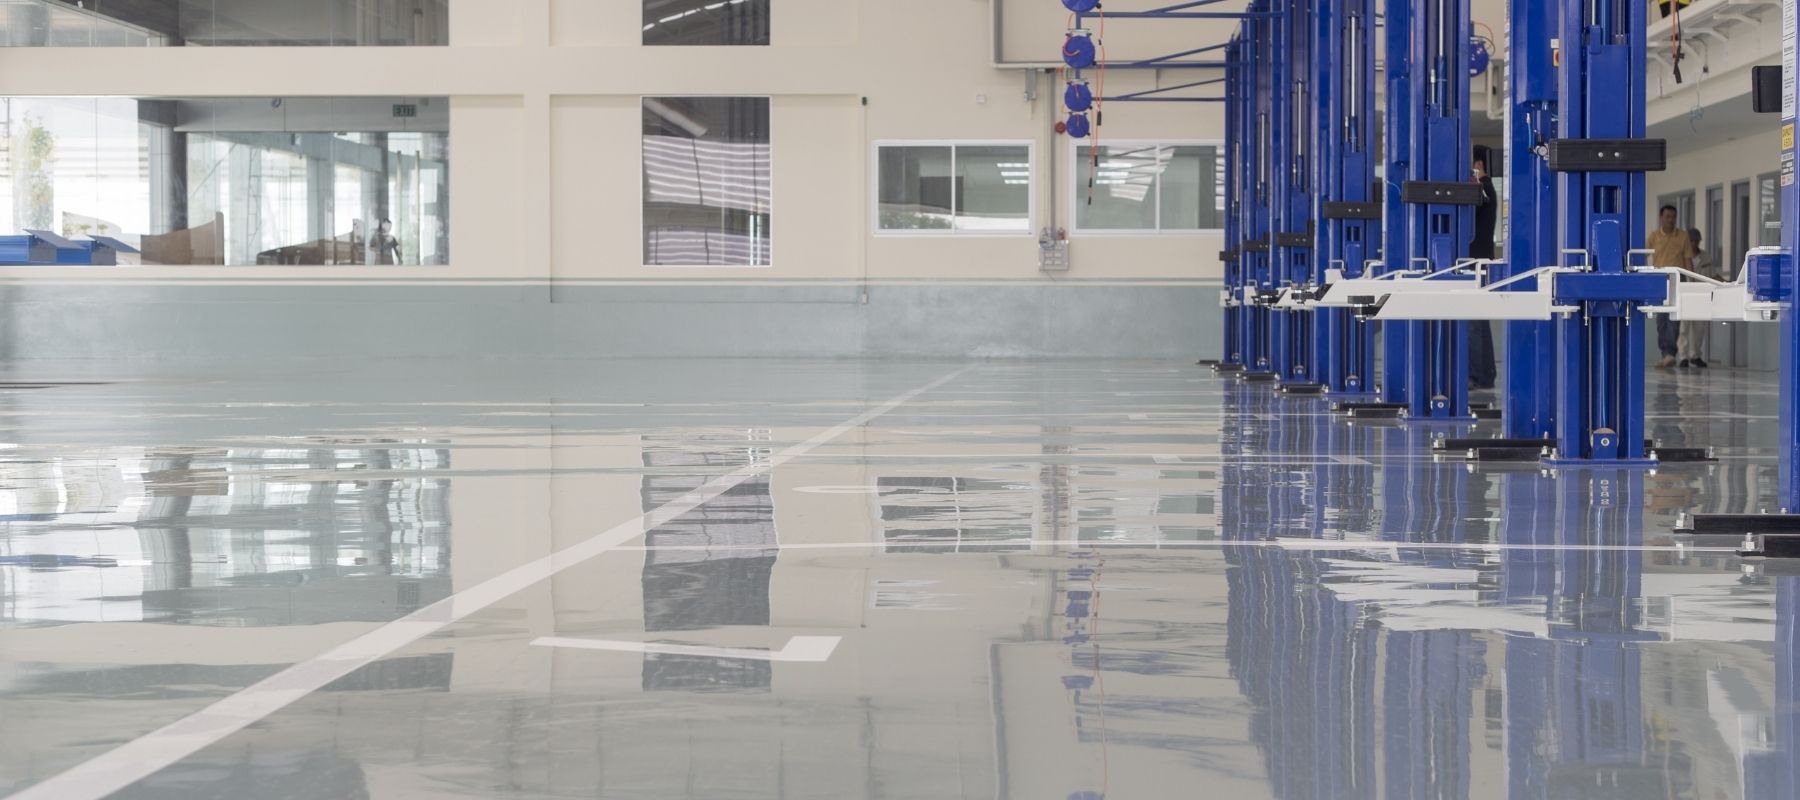 image of gray commercial flooring in an industrial warehouse